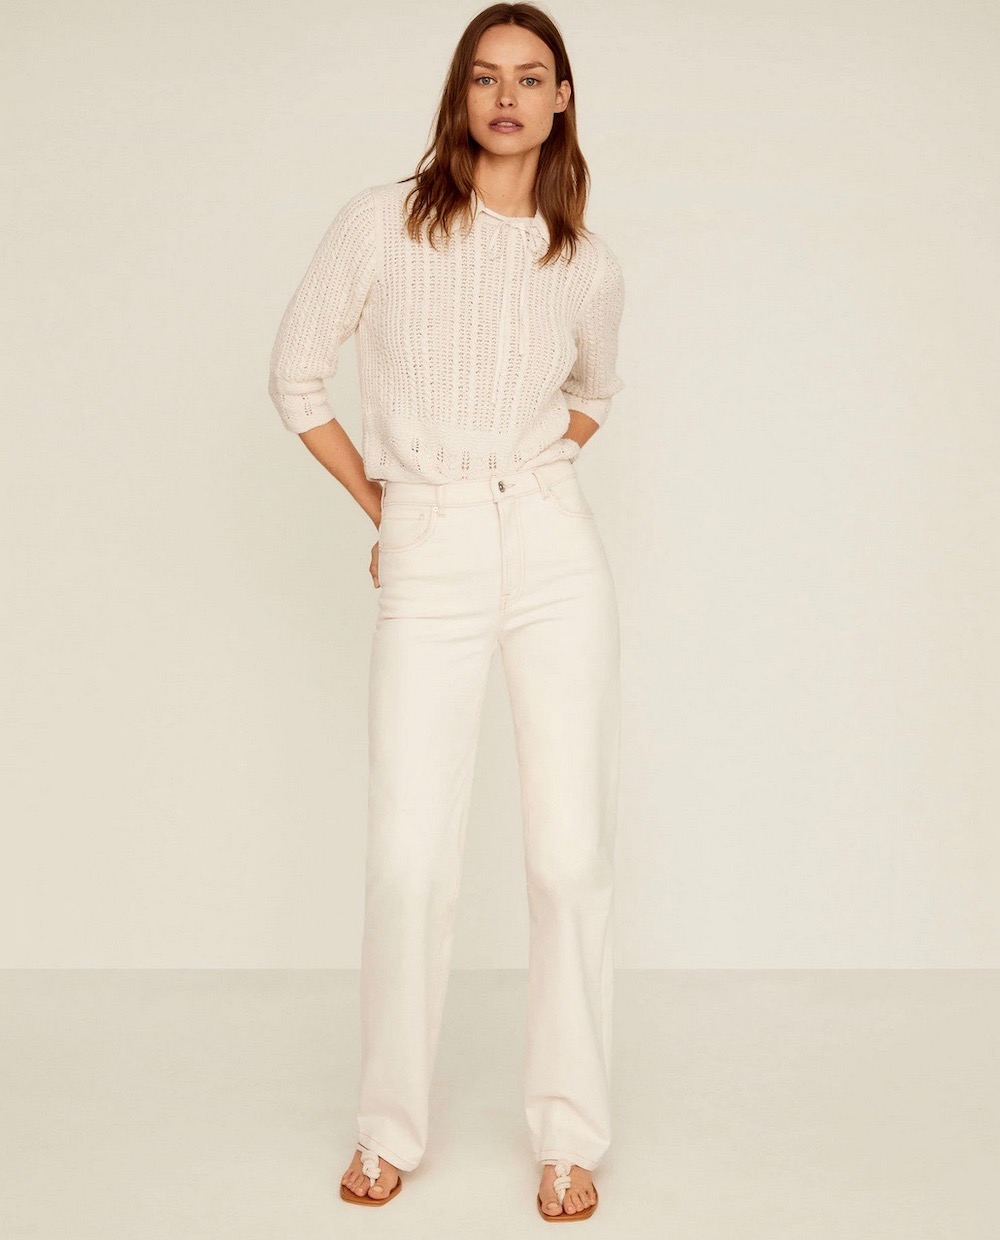 White Jeans to Show Off All Your Summer Tops - theFashionSpot